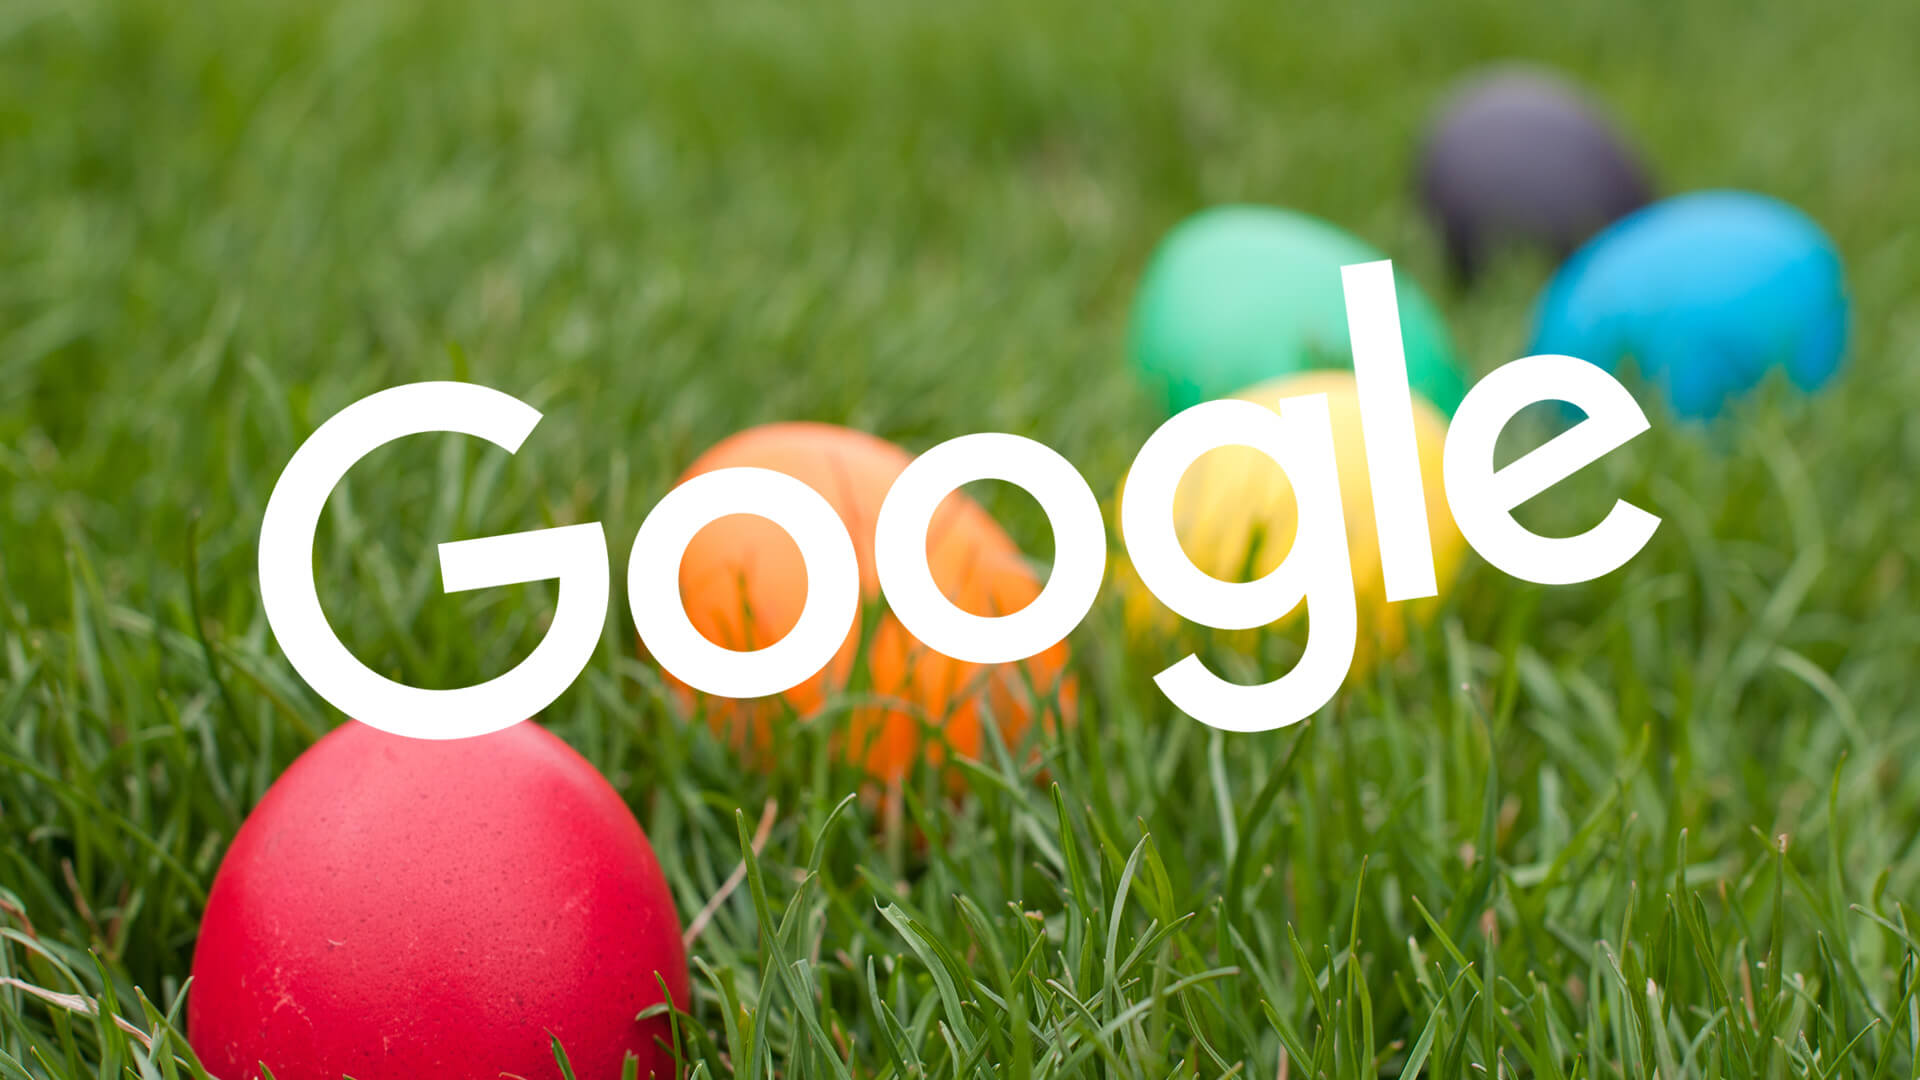 Google's latest Easter Egg is a video game that shows up with searches